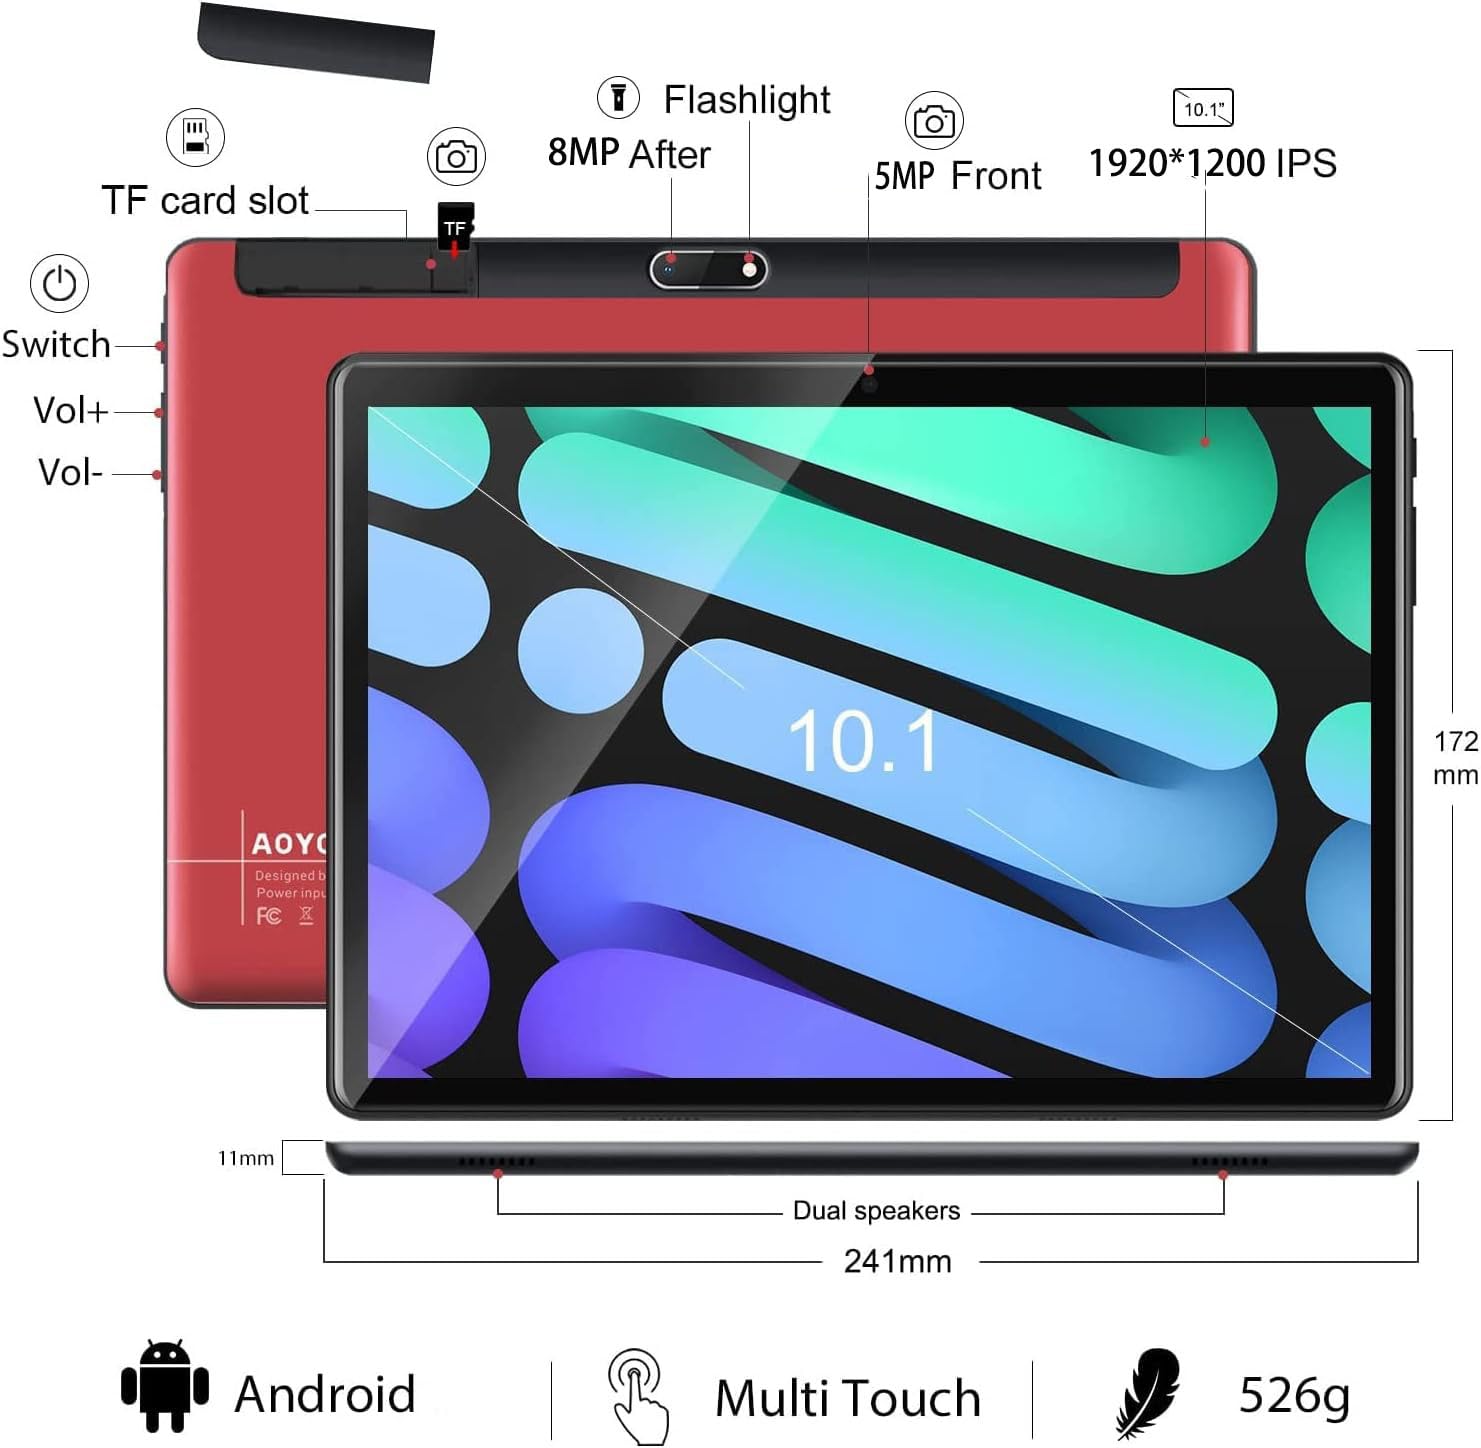 AOYODKG Tablet 2 in 1, Tablet 10.1 inch Android Tablet with Keyboard, 2.4/5G WiFi, 8GB+64GB(1TB Expand), Octa-Core, IPS HD Display, Dual Camera, Bluetooth, Google Certified Tablet PC, M40 (Red)